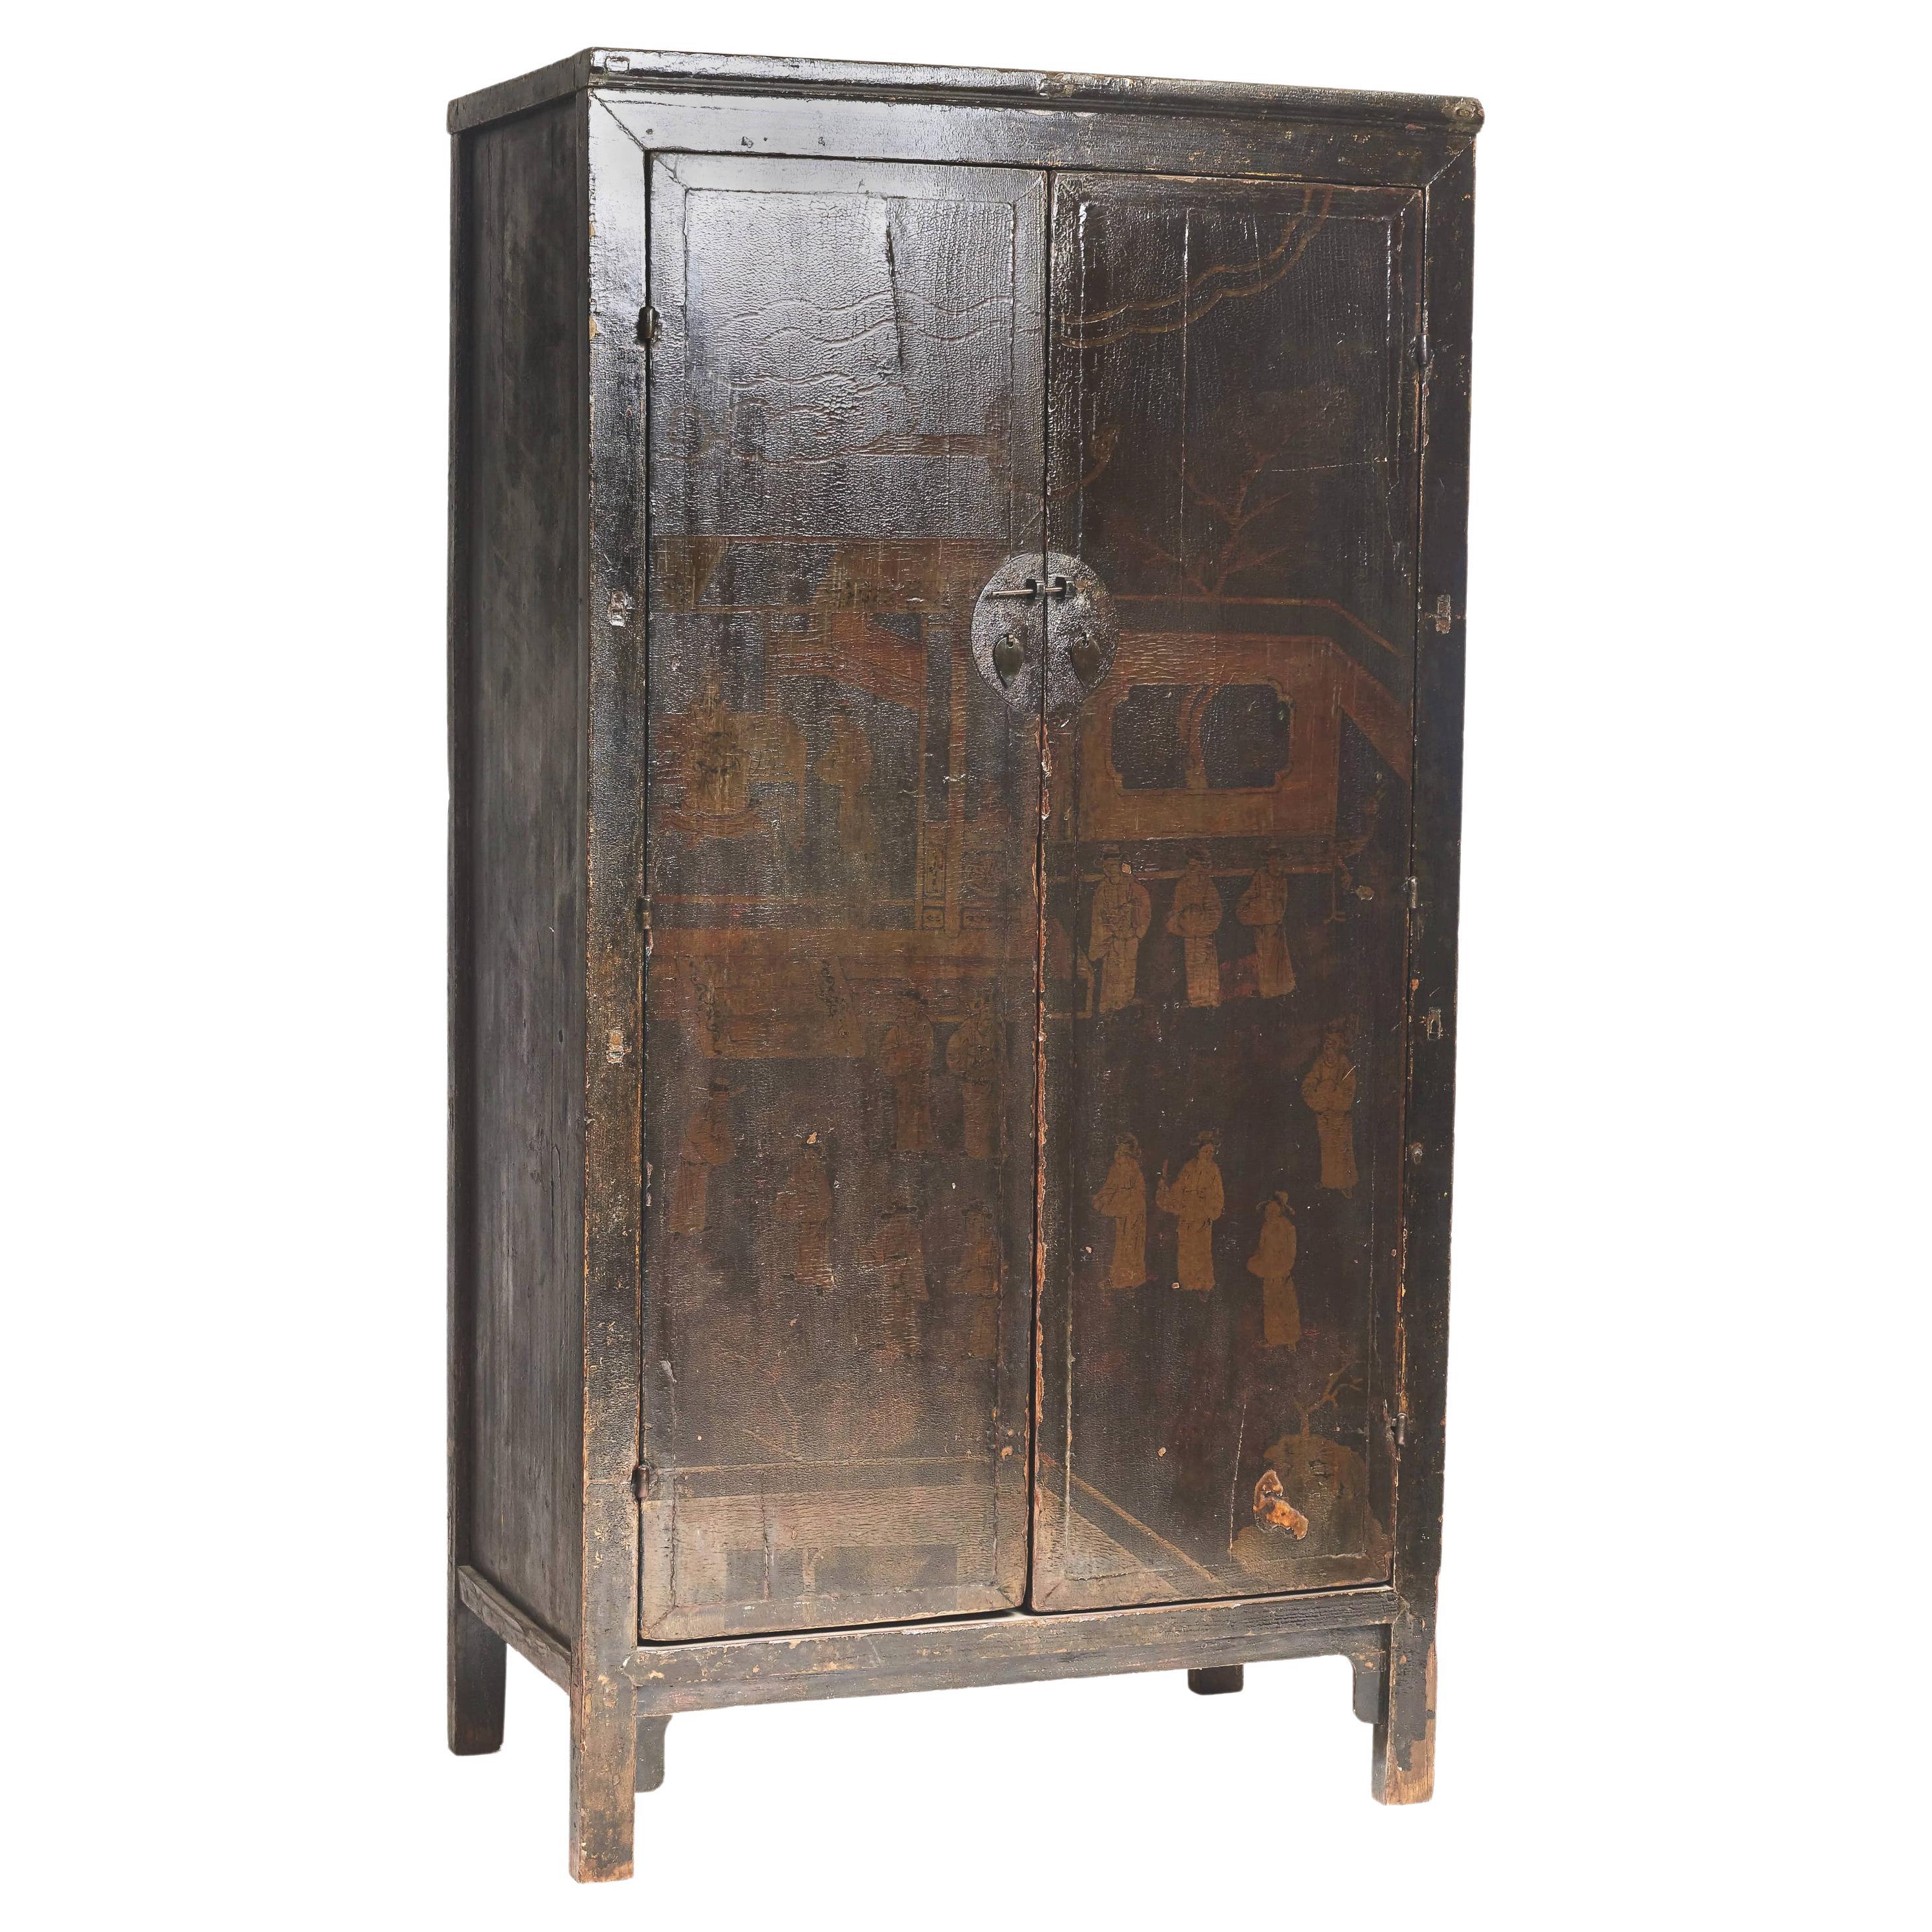 18Th Century Black/Brown lacquered With Decoration Cabinet From Shanxi Province